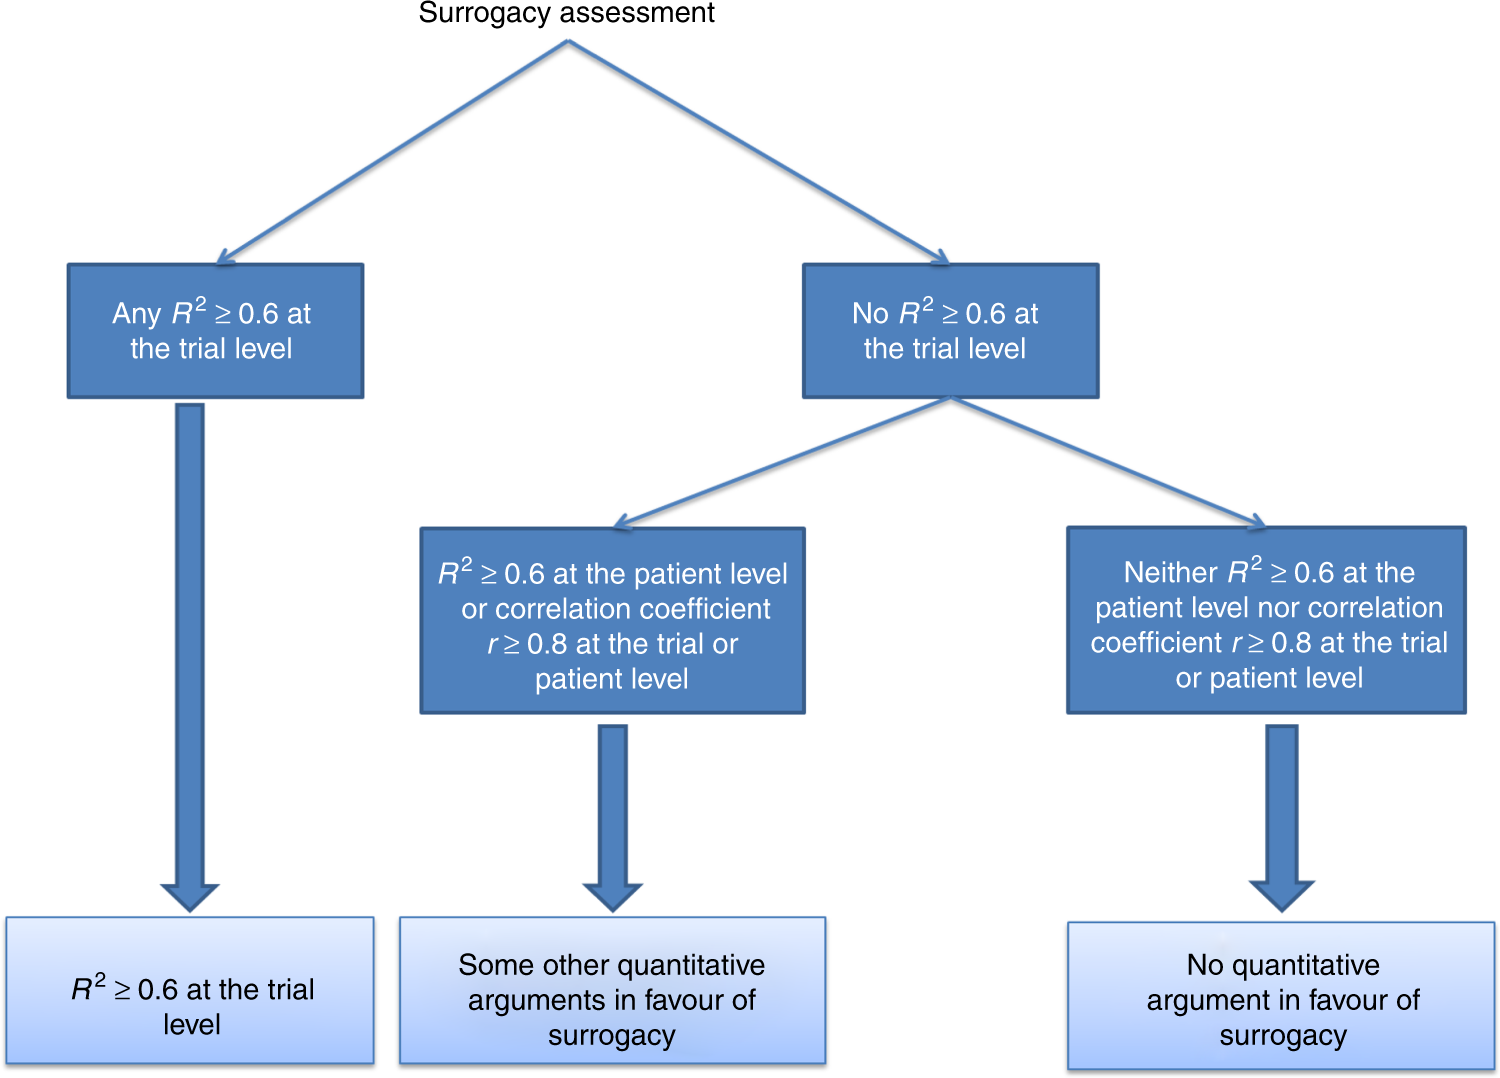 Progression-free survival as a surrogate for overall survival in oncology  trials: a methodological systematic review | British Journal of Cancer